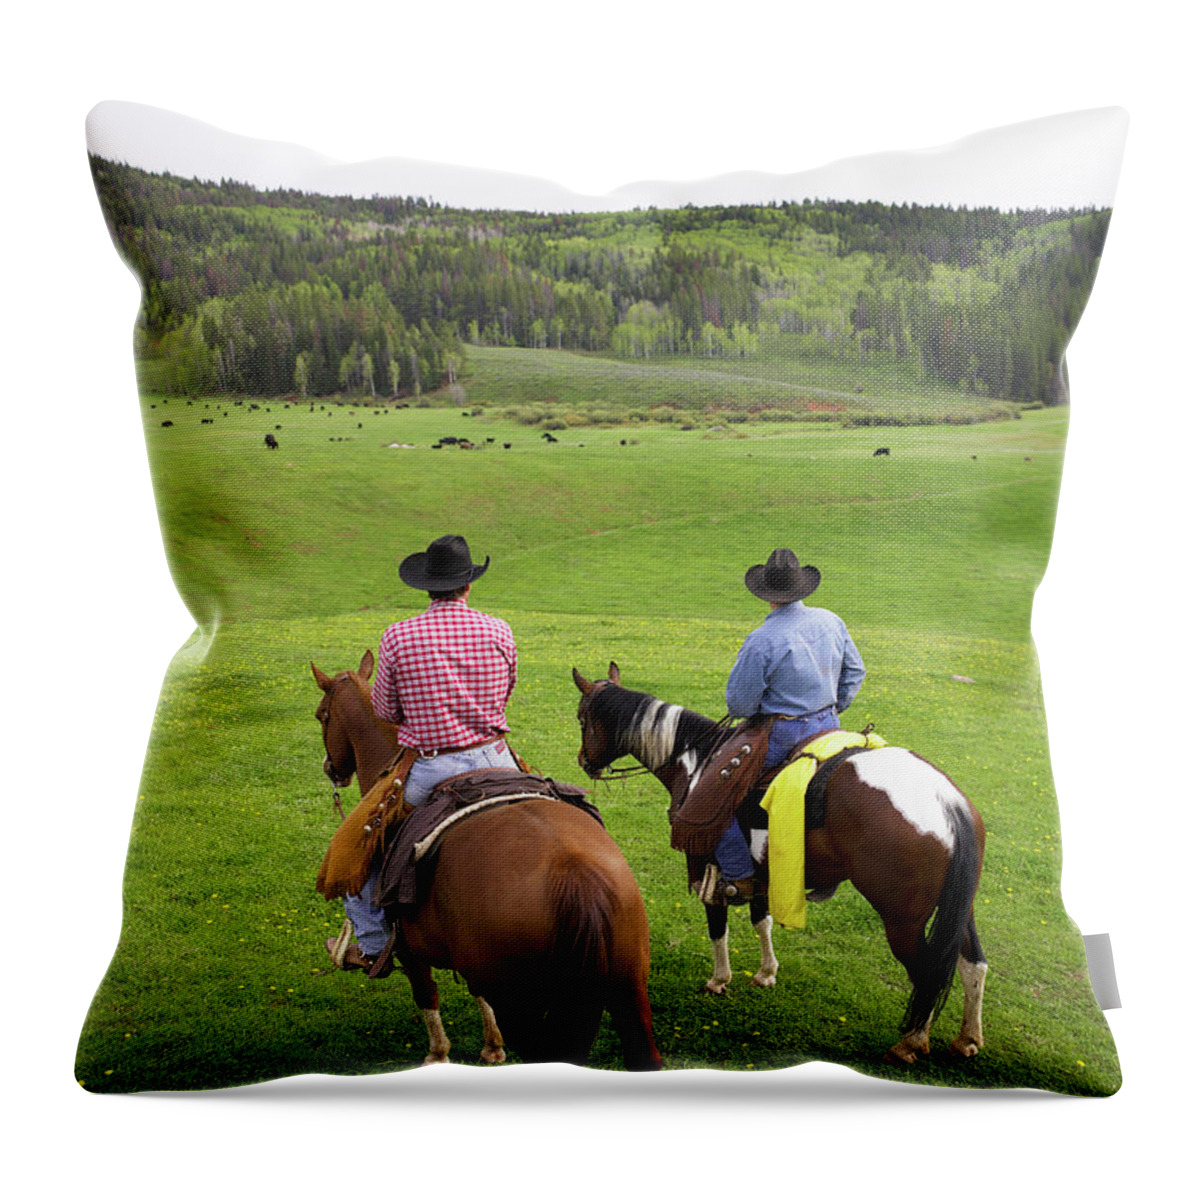 Horse Throw Pillow featuring the photograph Two Cowboys On Horseback Riding Though by John P Kelly